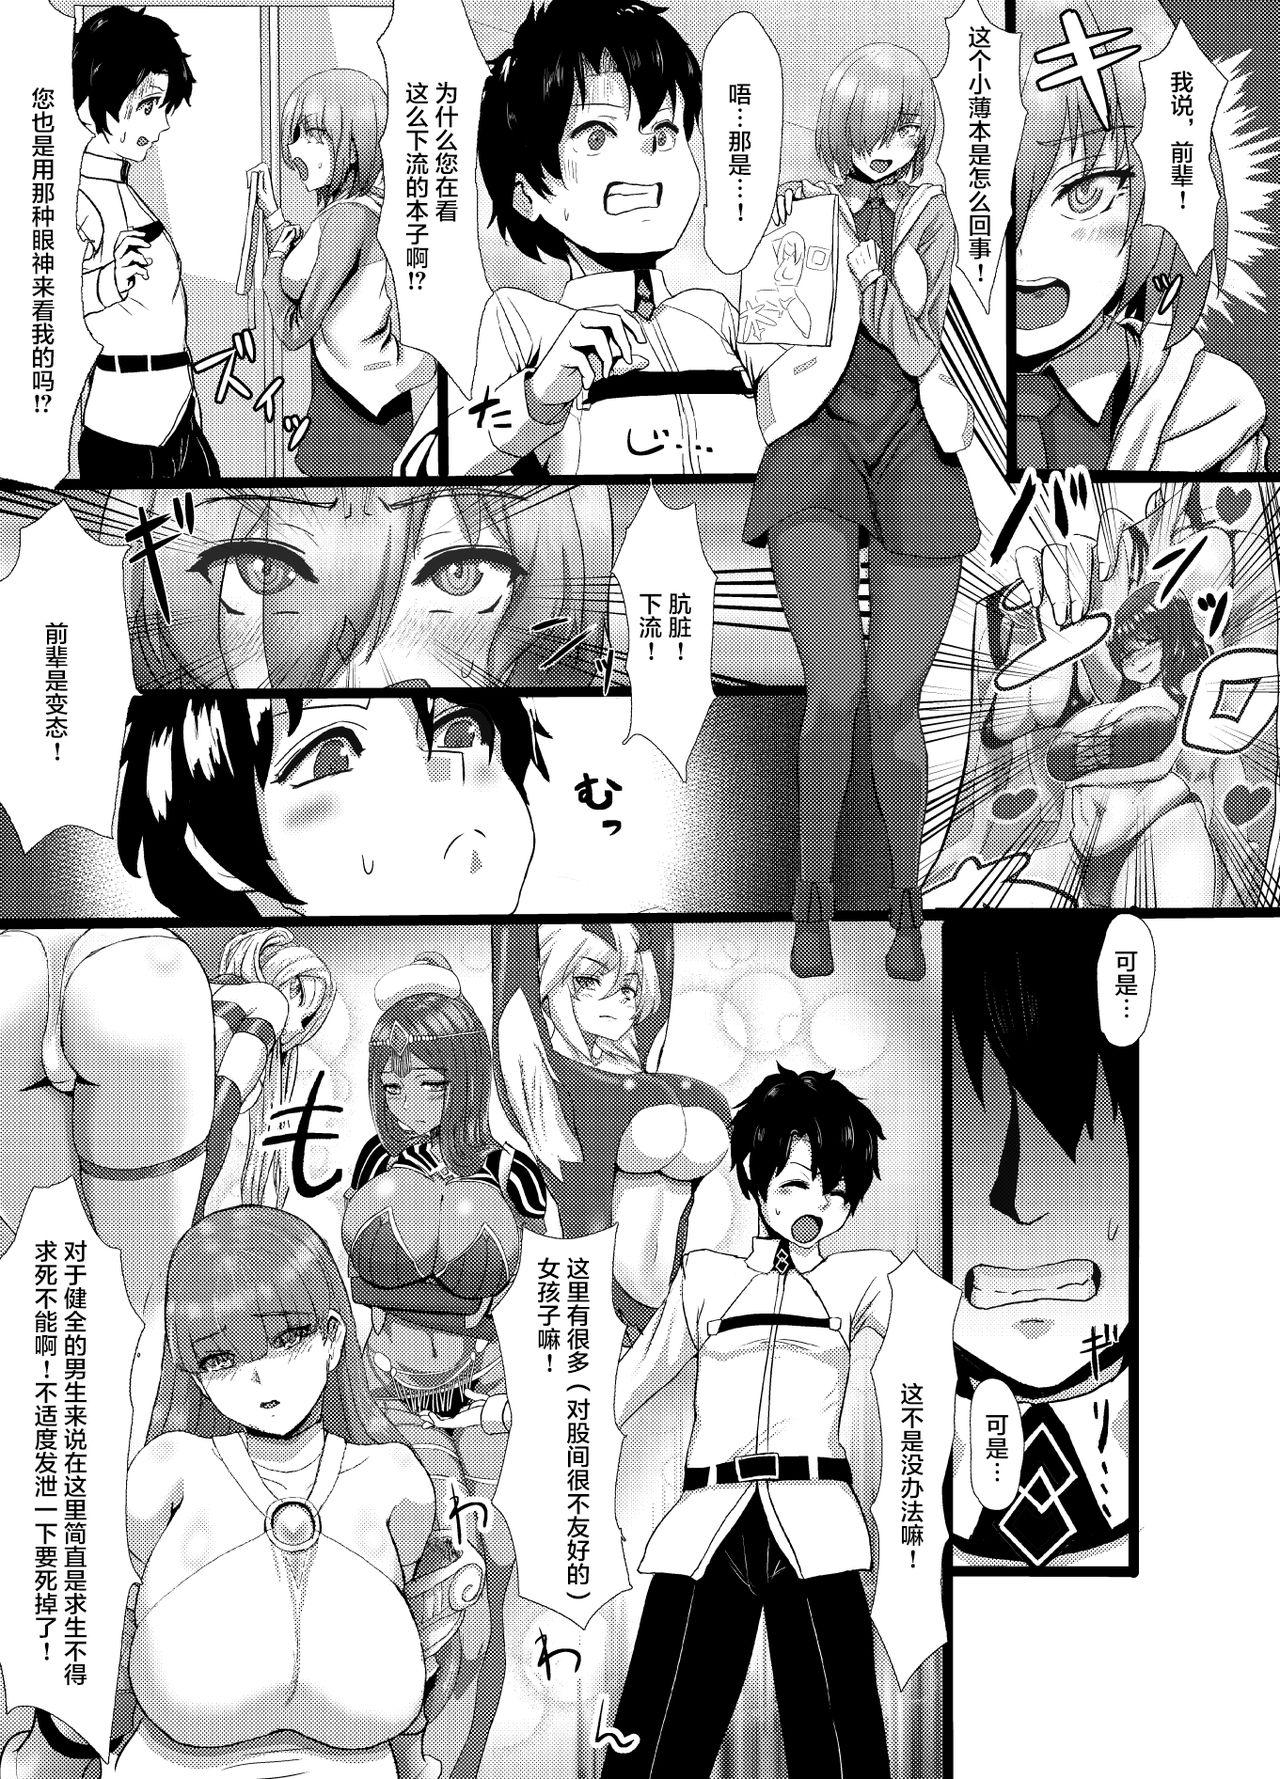 Pussy To Mouth Pure Mashu Gives In to Futanari Pleasure 1 & 2 - Fate grand order Shecock - Page 4